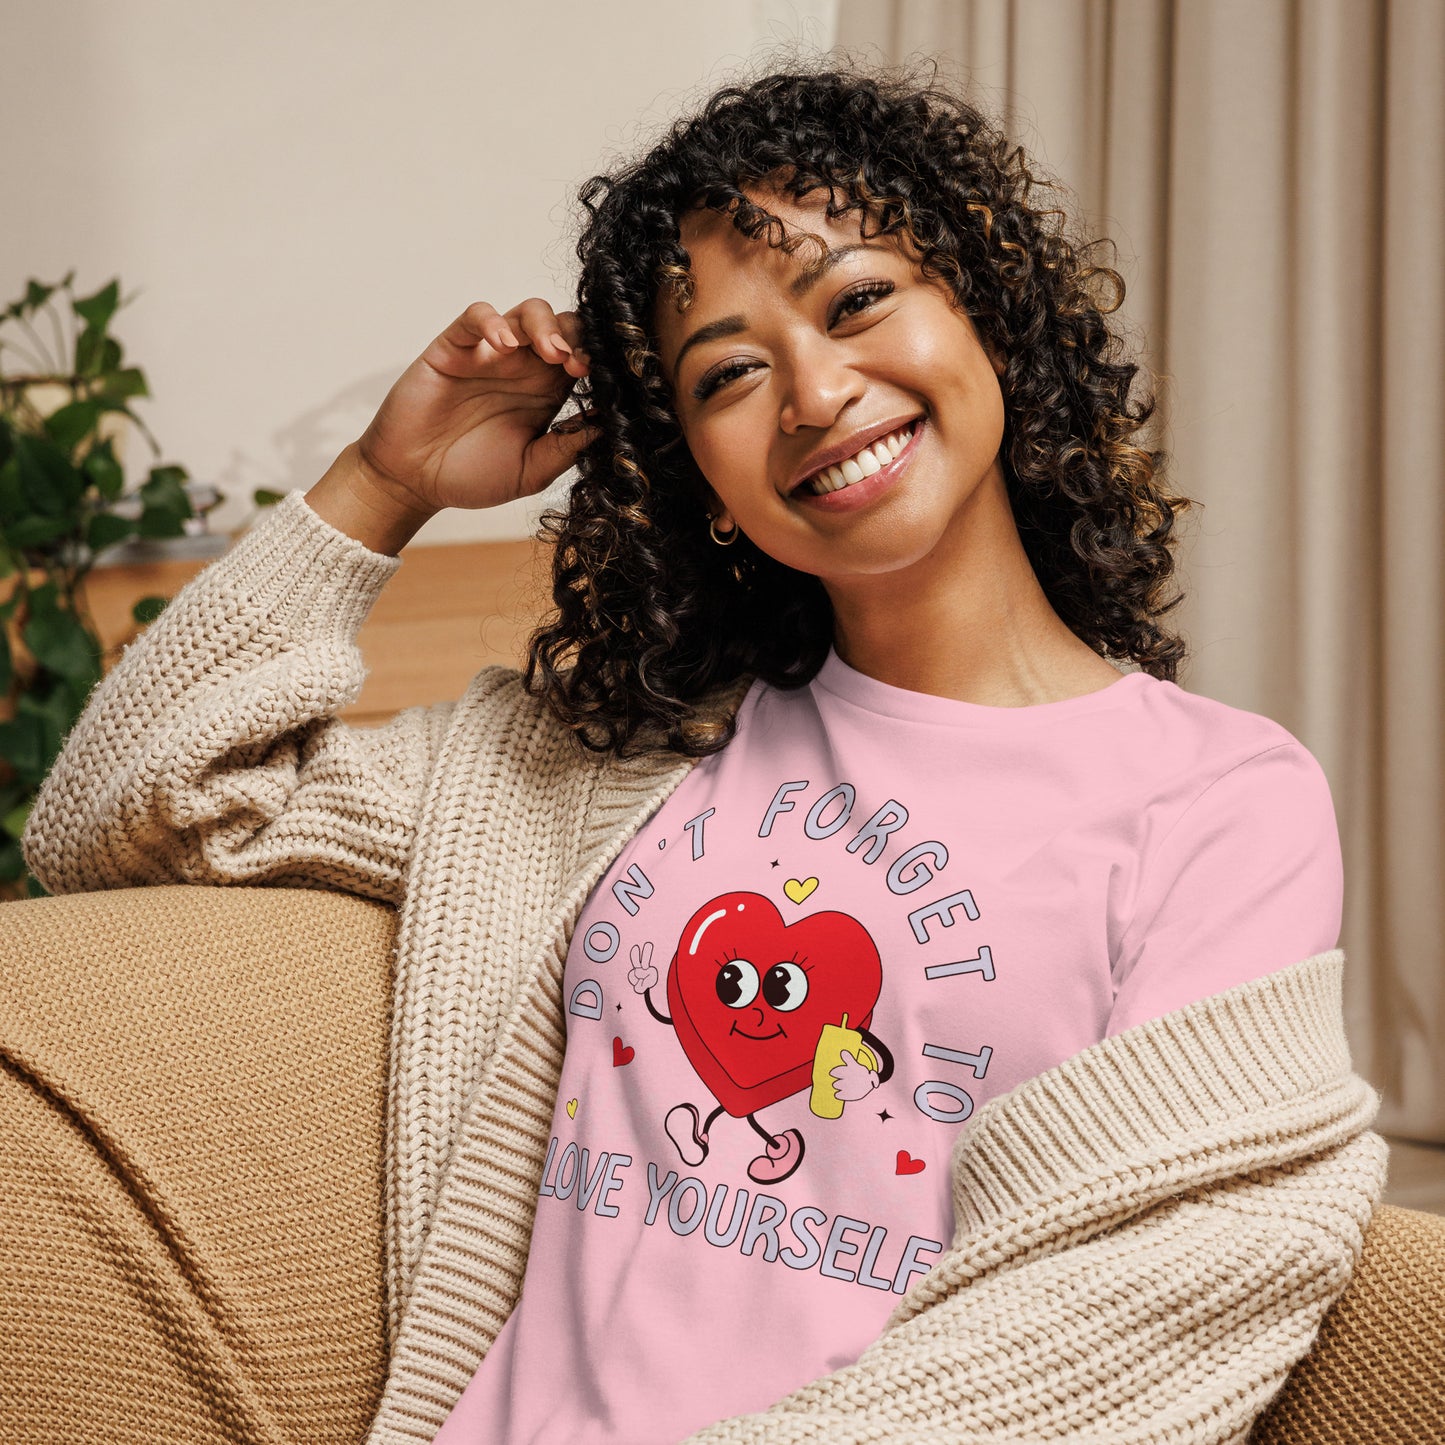 Love Yourself Women's Relaxed T-Shirt